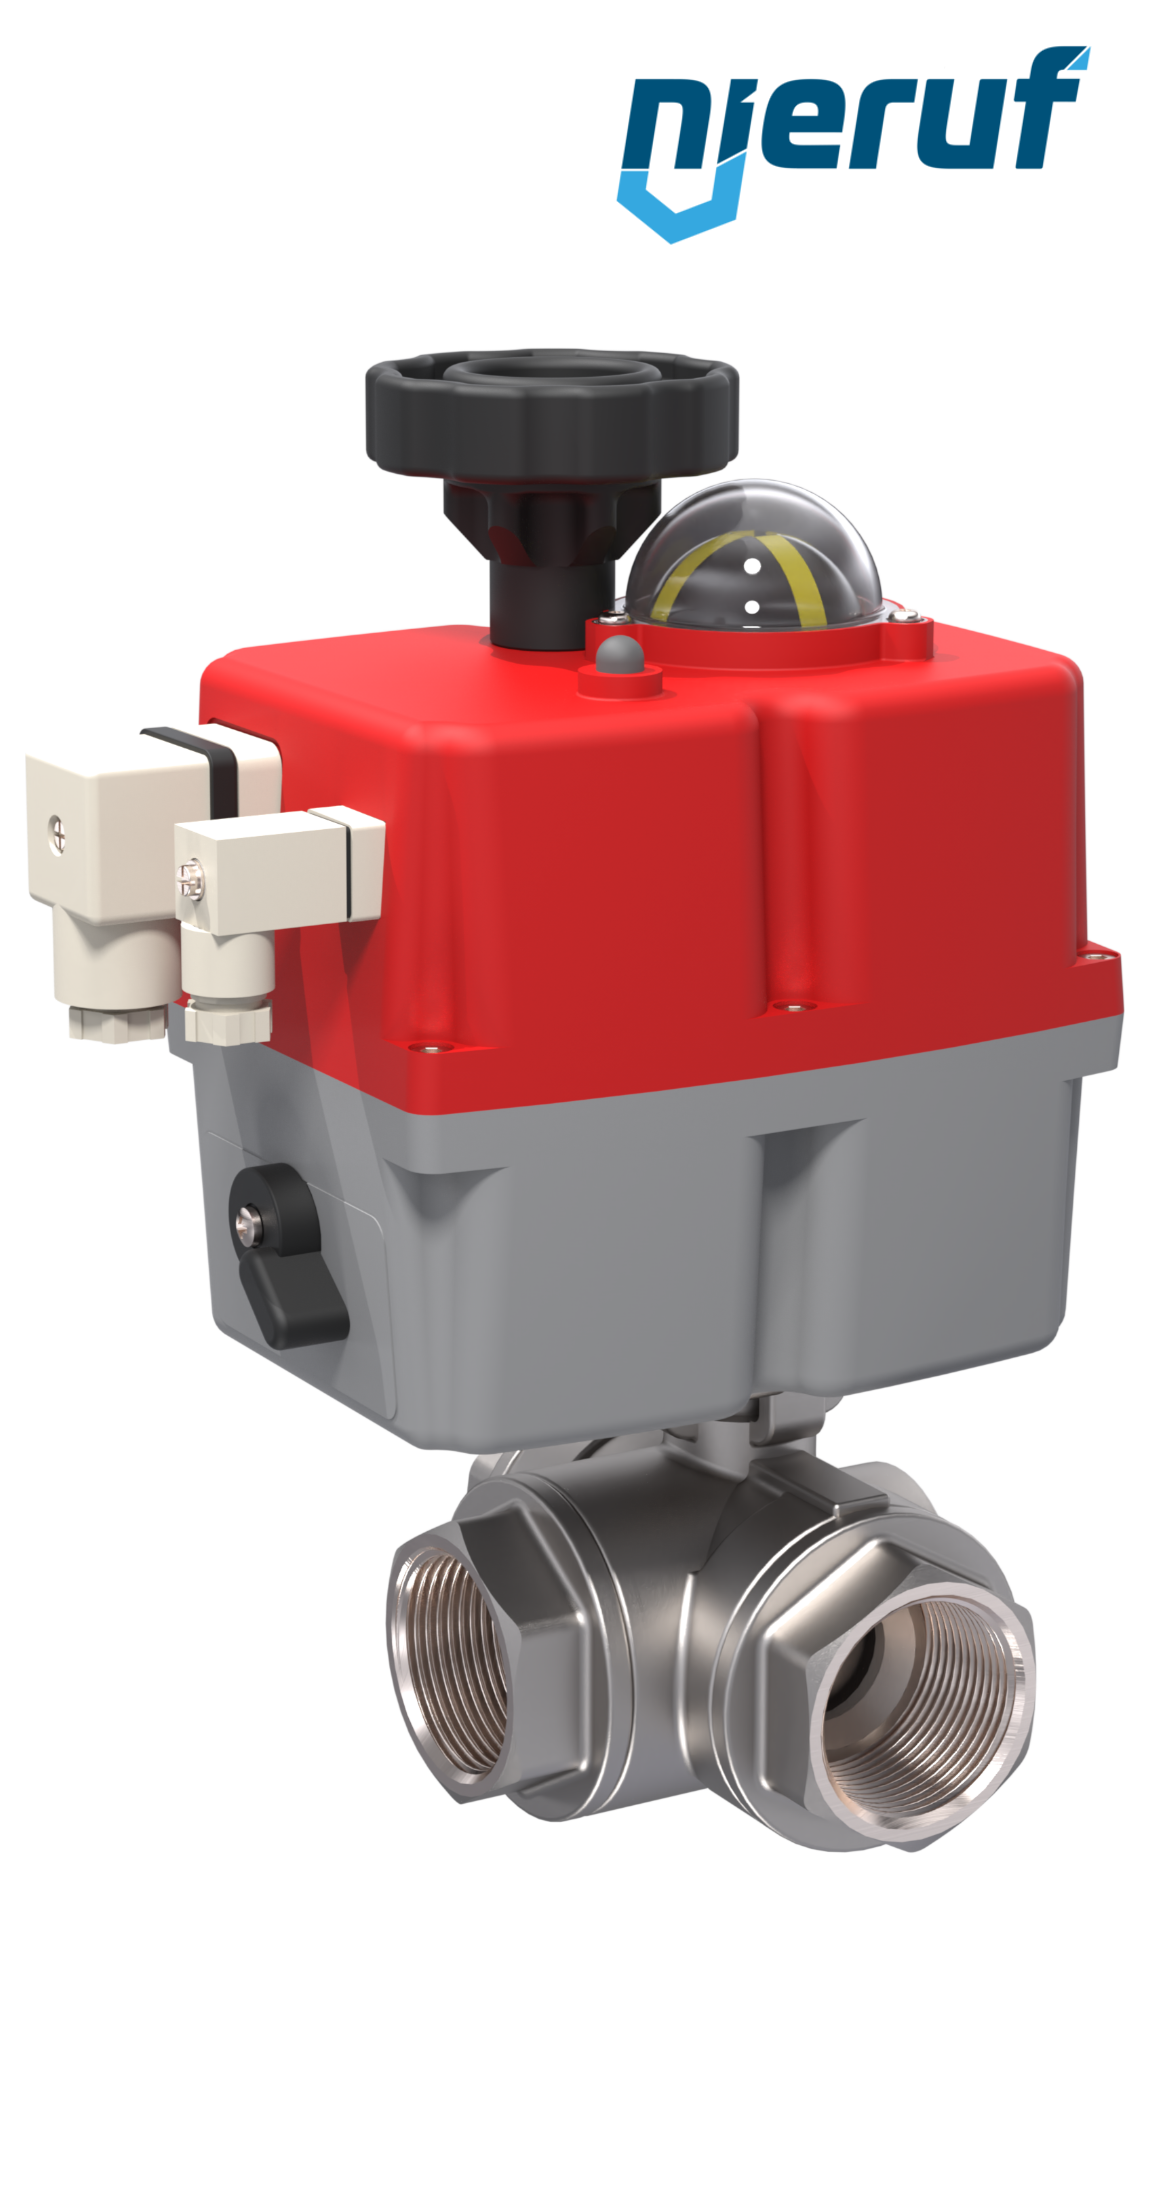 3 way automatic-ball valve 24-240V DN8 - 1/4" inch stainless steel reduced port design with T drilling